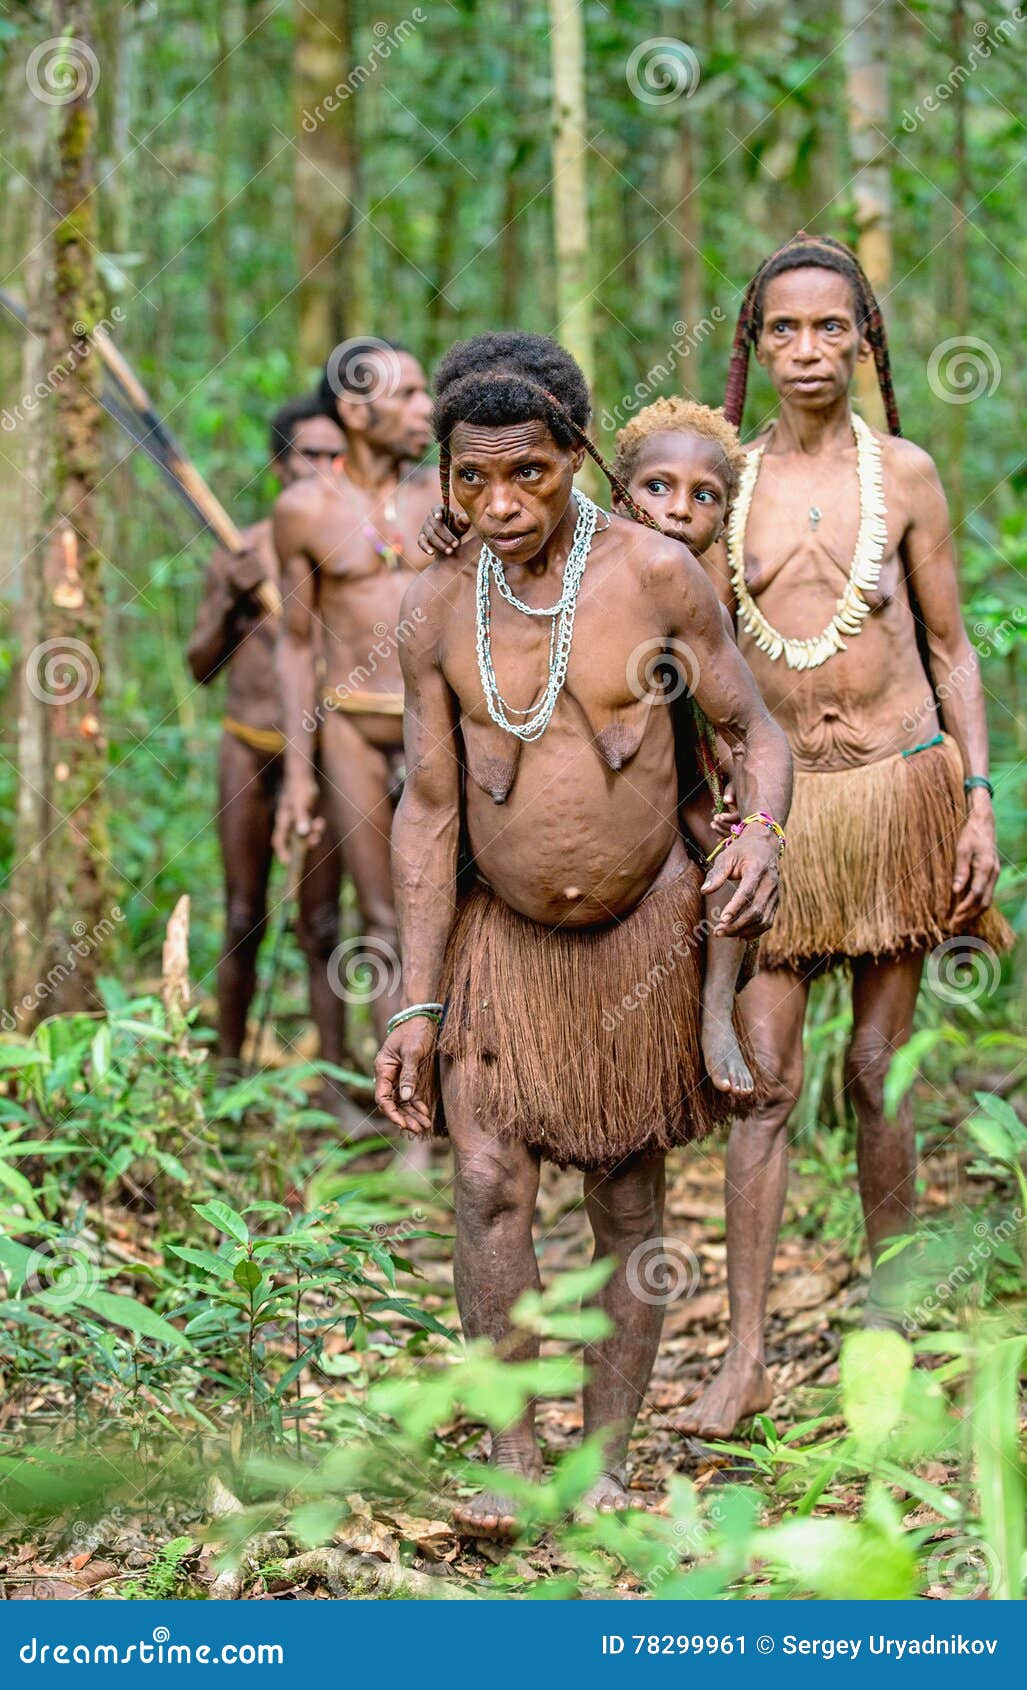 Wild naked tribes Group Naked Papuan Korowai Tribe in the Wild Jungles ...